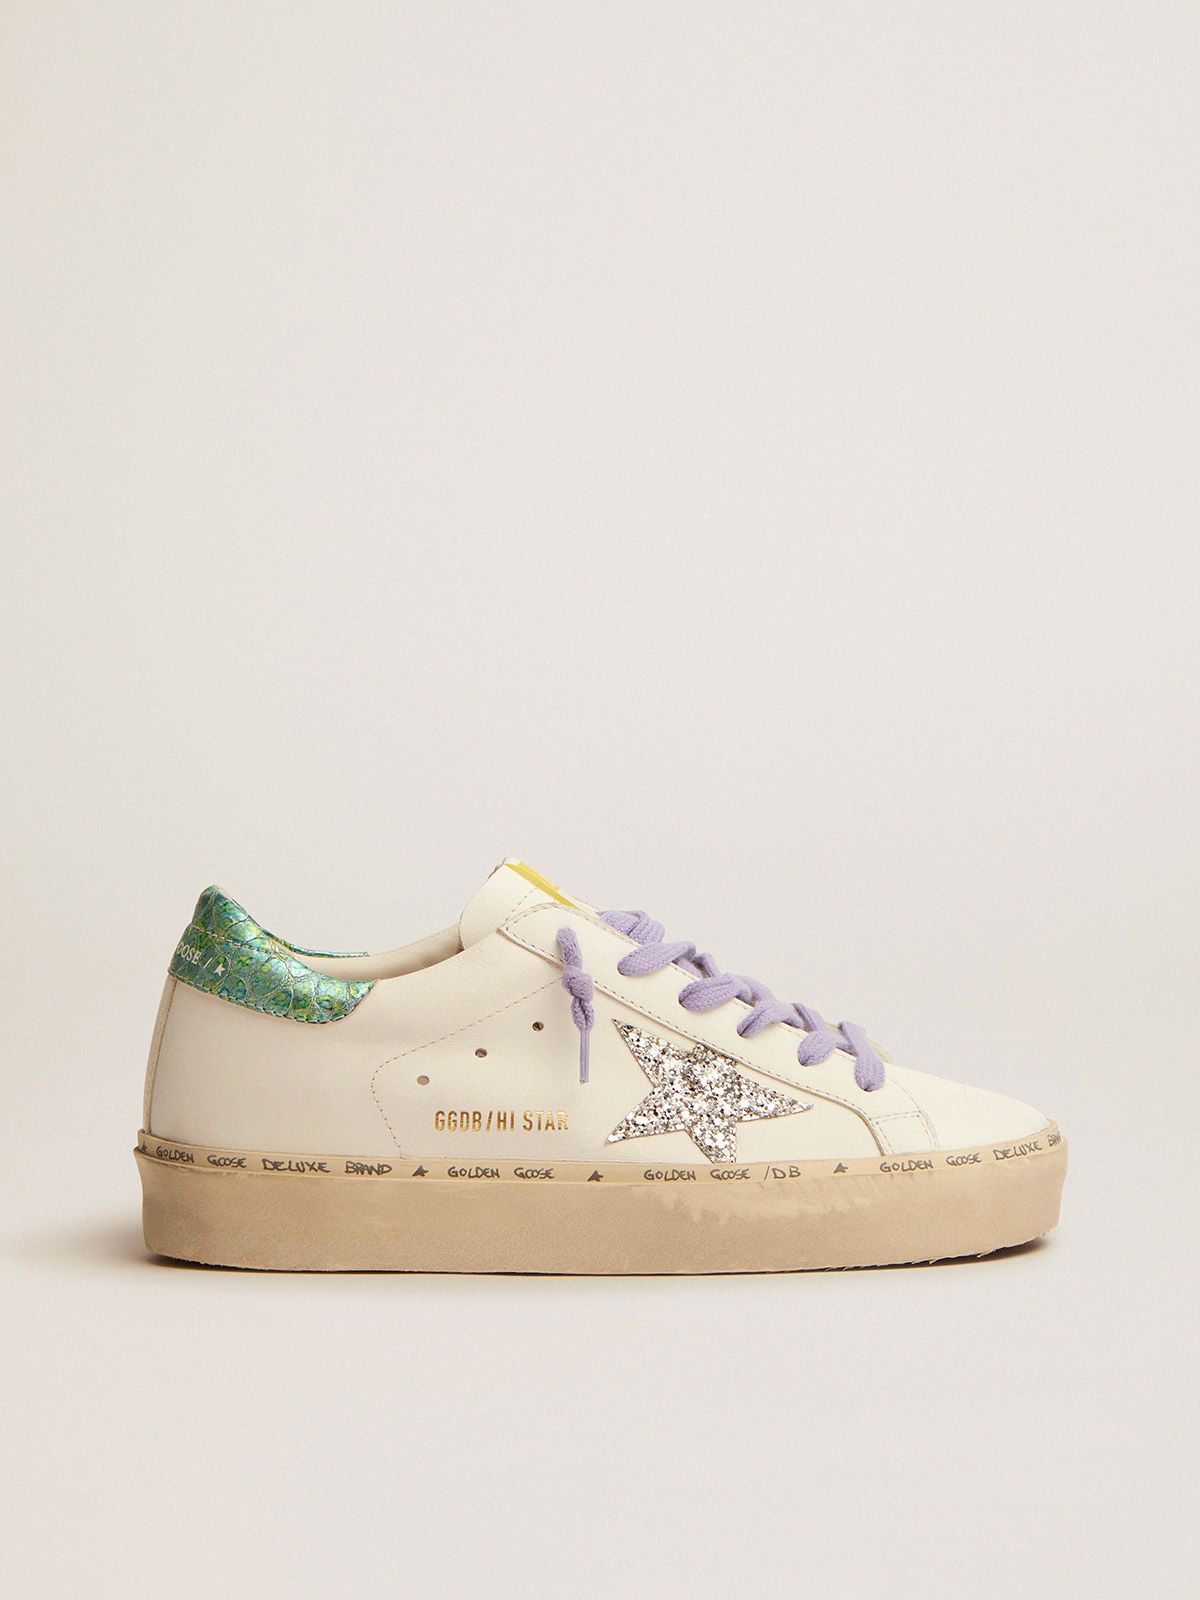 golden goose Hi sneakers silver LTD star glitter and with Star heel aquamarine leather tab snake-print